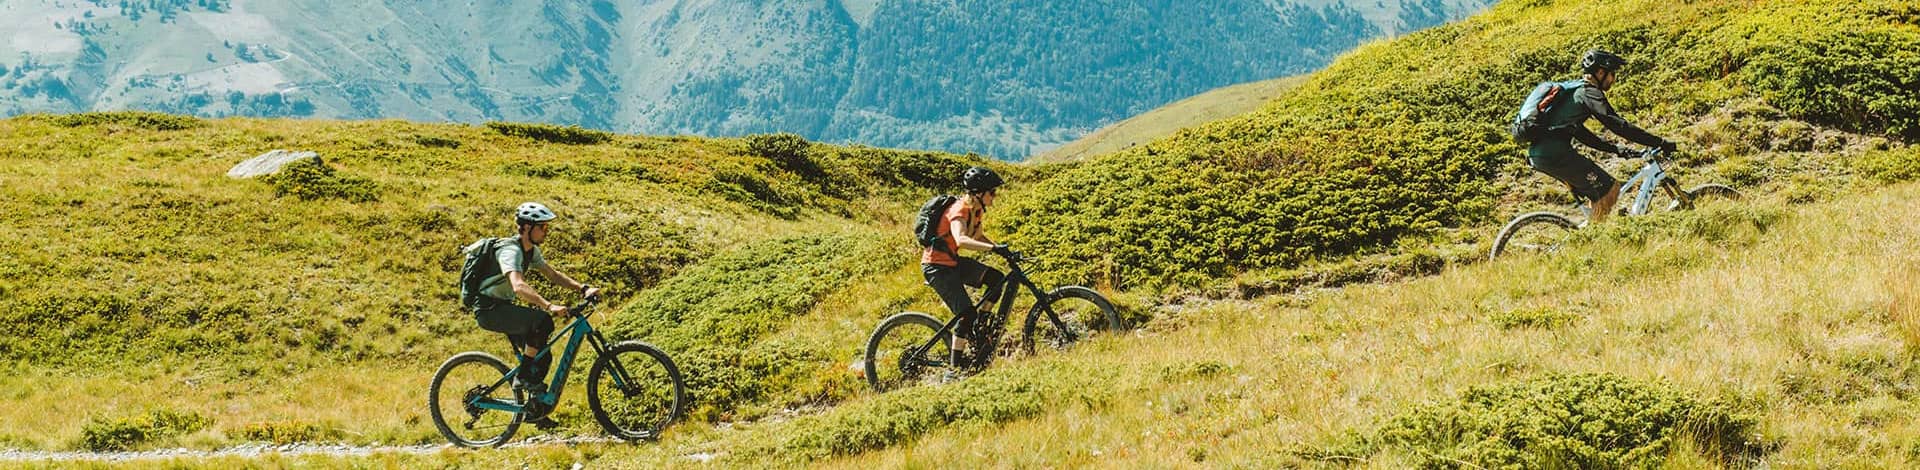 Ride a whole day in Les 3 Vallées thanks to the 3-day freedom mountain bike pass